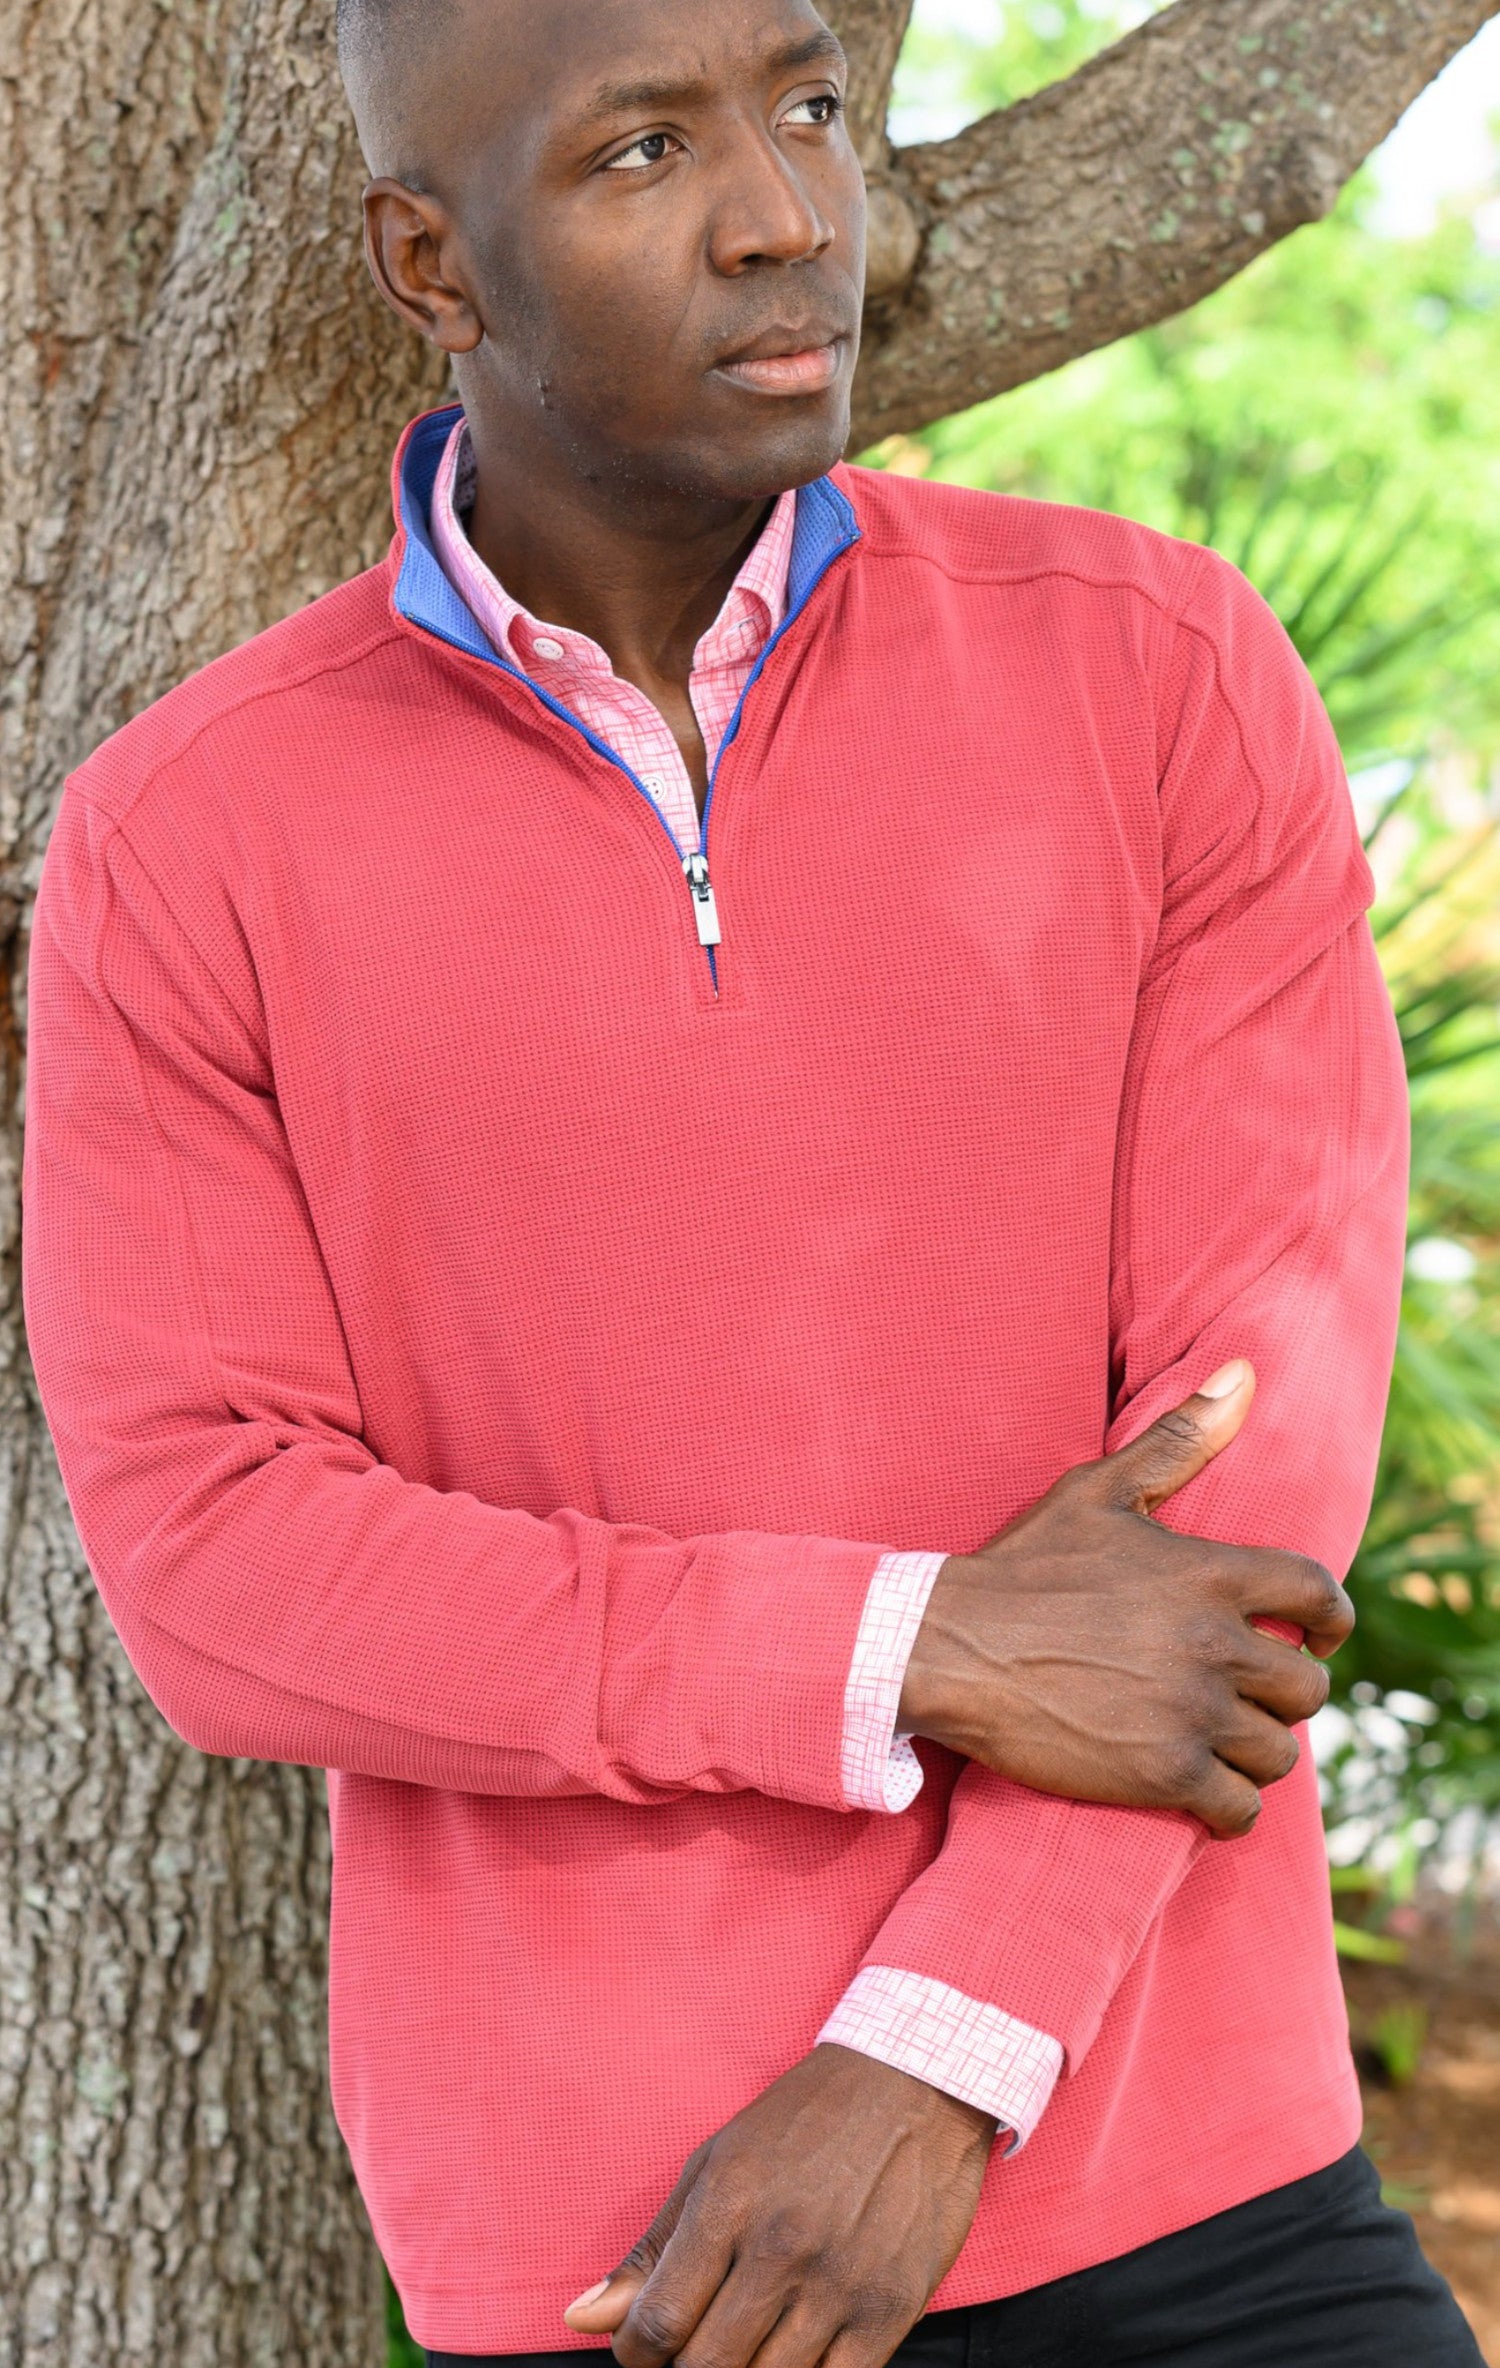 Look sharp in any occasion with this cool 1/4 zip model. Crafted from polynosic fabric, its perfect weight and feel pair perfectly with its waffle weave textured fabric and classic fit. Choose from Red, Navy, and Blue to make a bold statement.